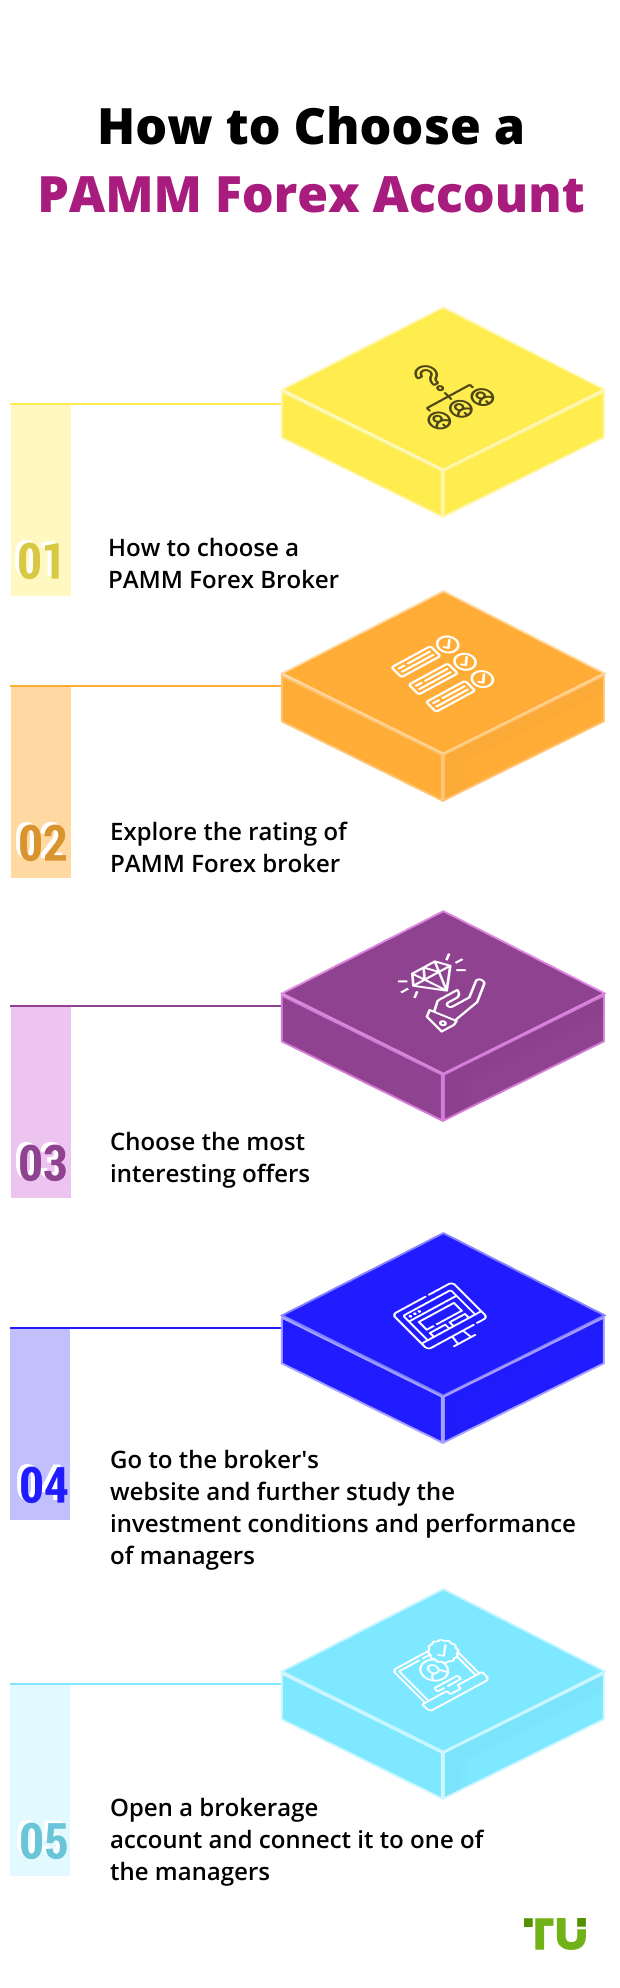 Pamm forex malaysia online top 50 forex brokers in the world